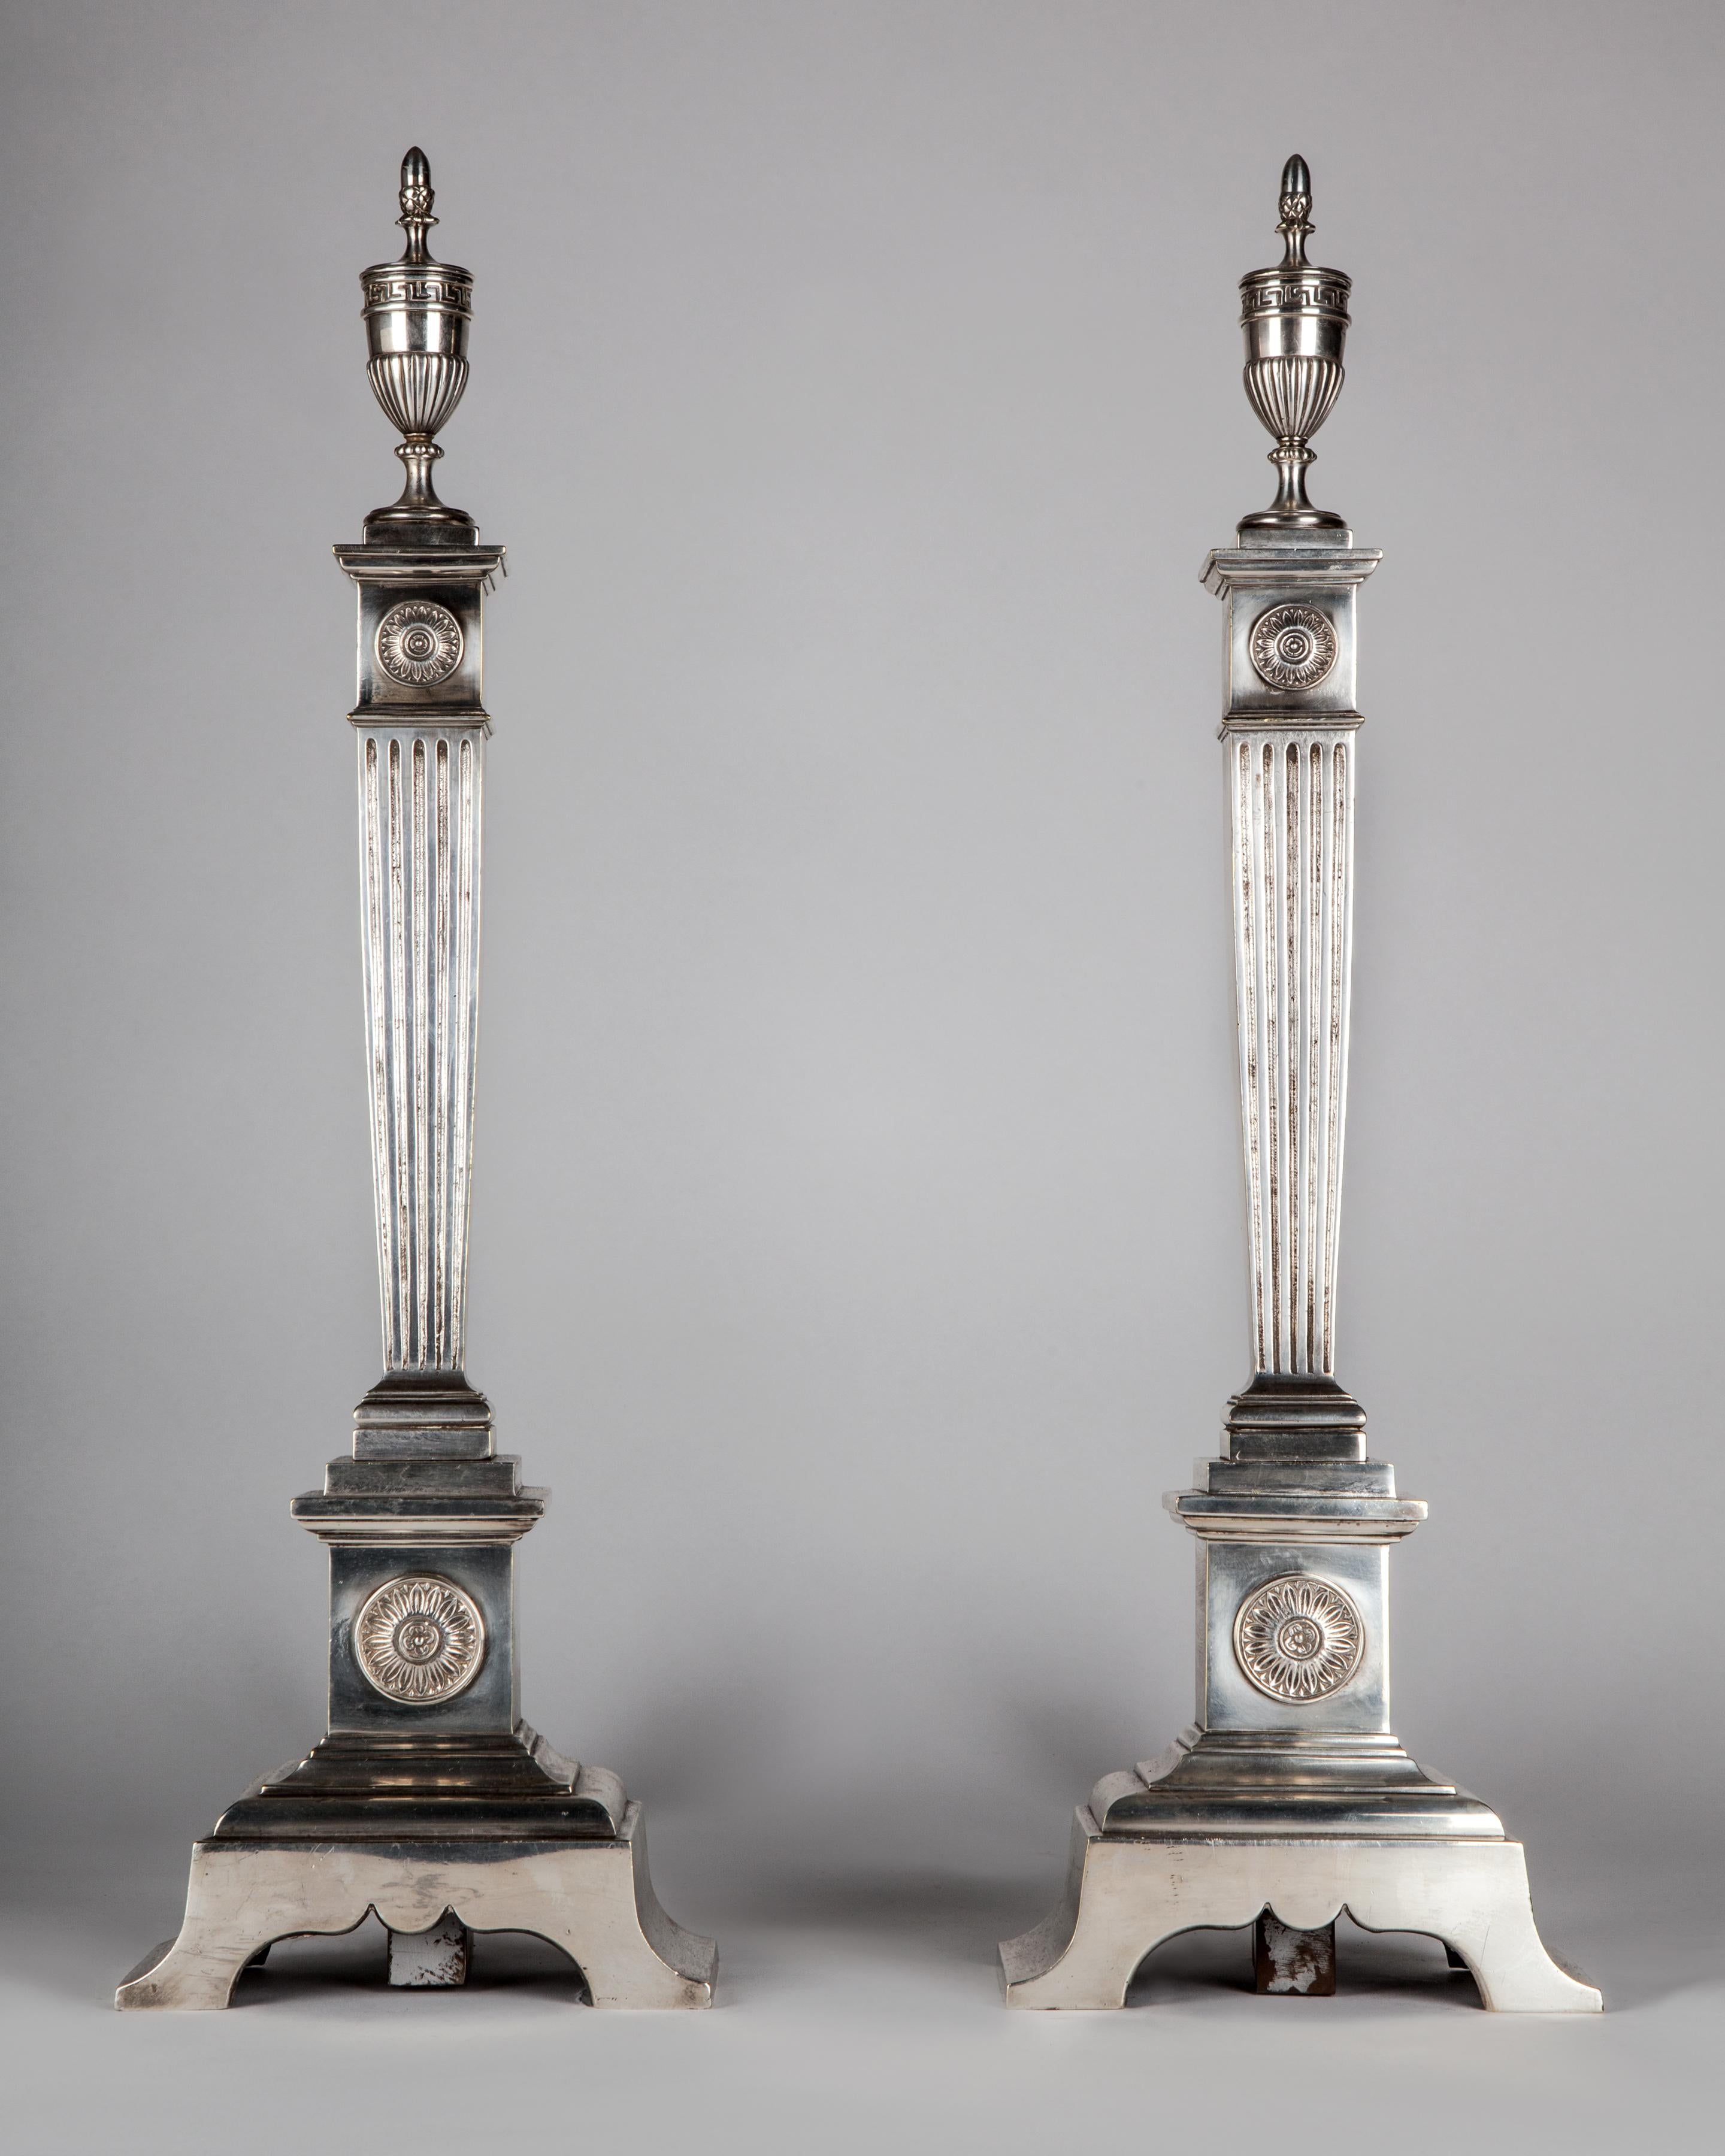 Blackened Silverplate Neoclassical Andirons with Fluted Columns and Urn Finials, c. 1910s For Sale